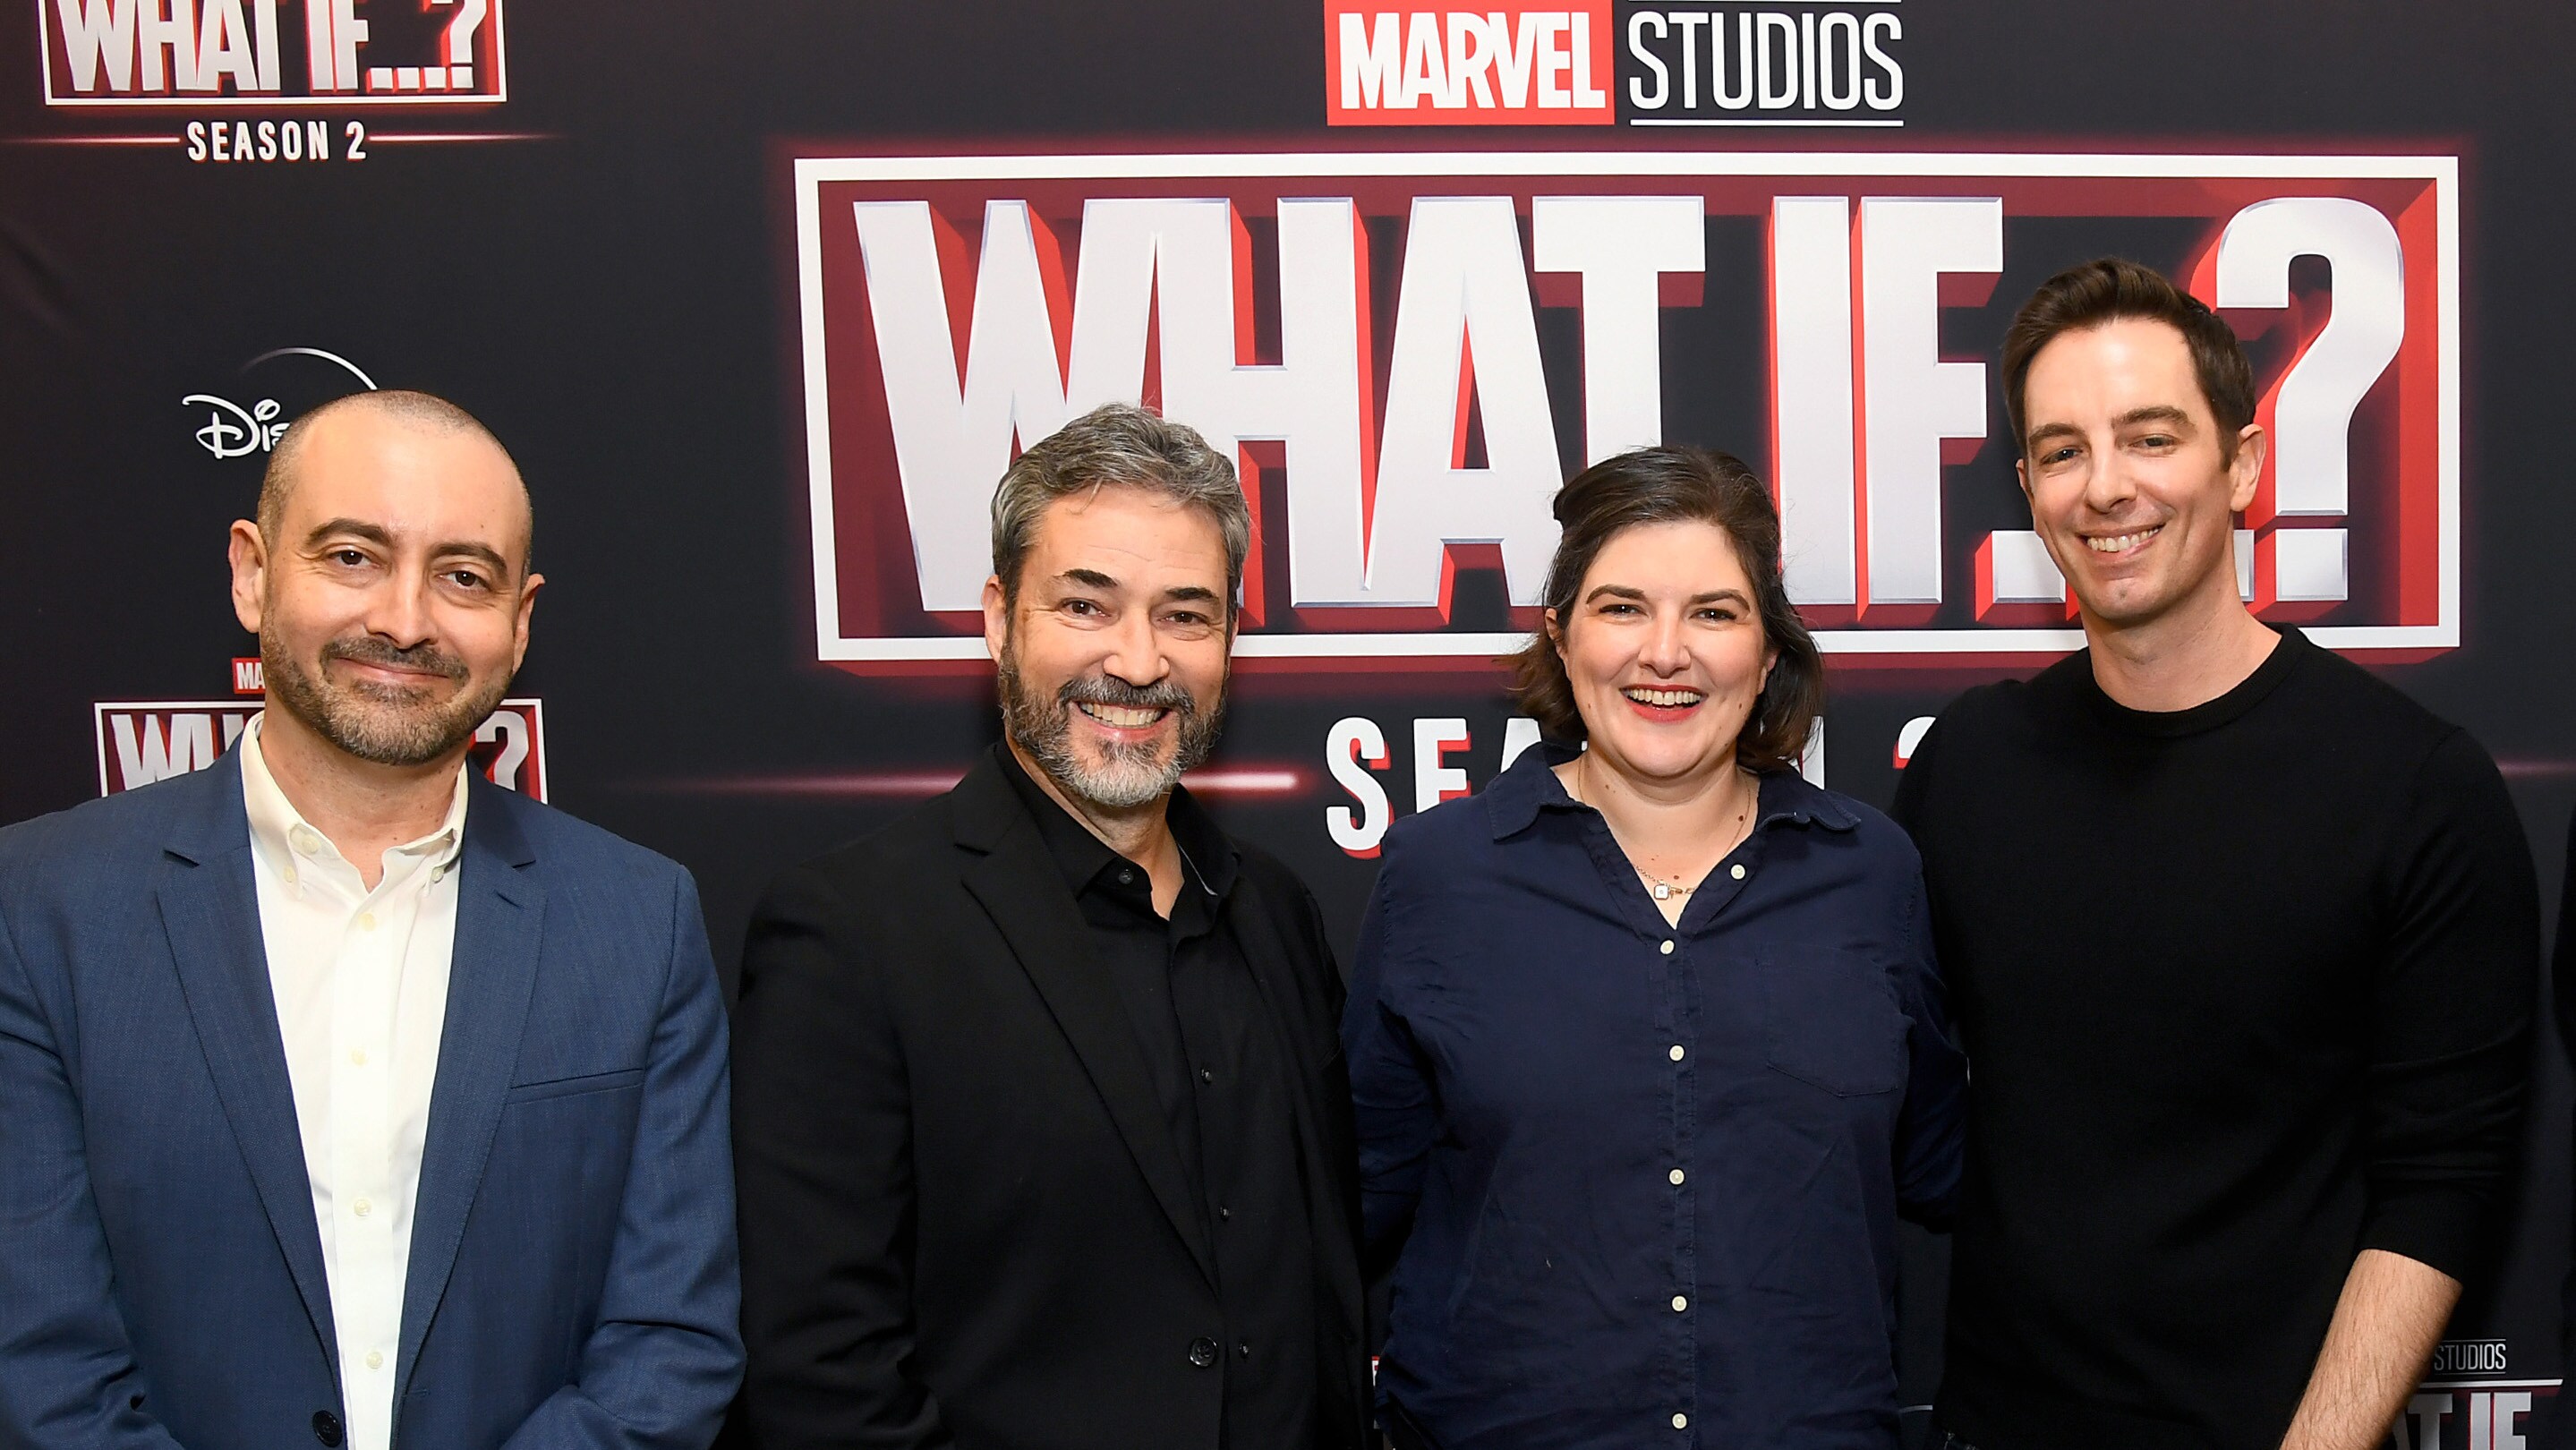 Two All-New Episodes Of Marvel Studios’ Animated Series “What If…?” Screened On The Historic Walt Disney Studios Lot Tonight—Event Photos Now Available